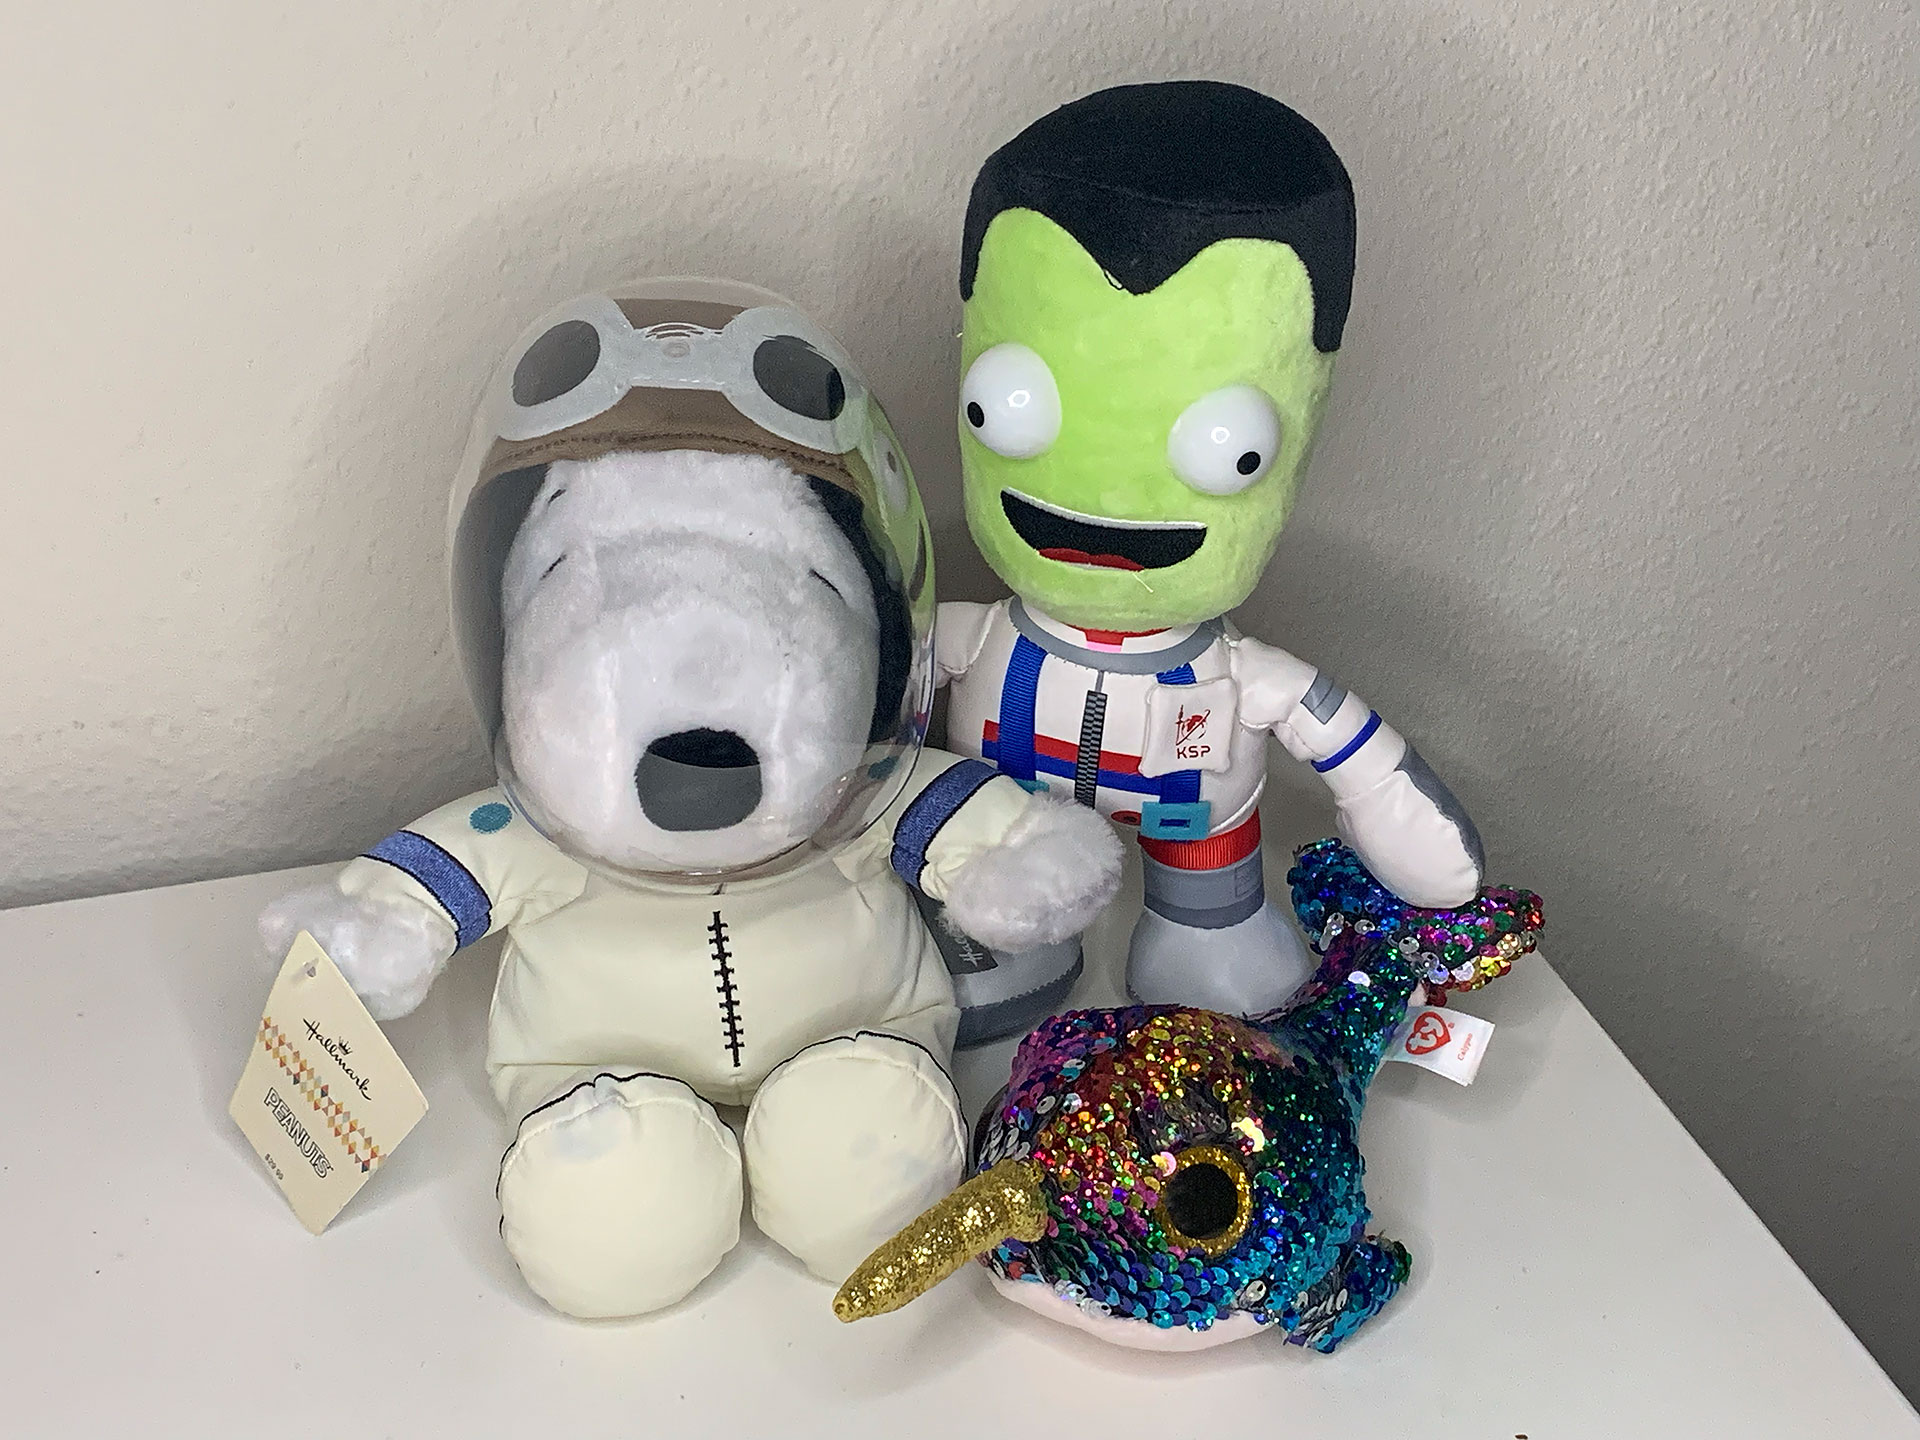 photo of two small plush toys wearing spacesuits — one a white dog and the other a green-skinned humanoid